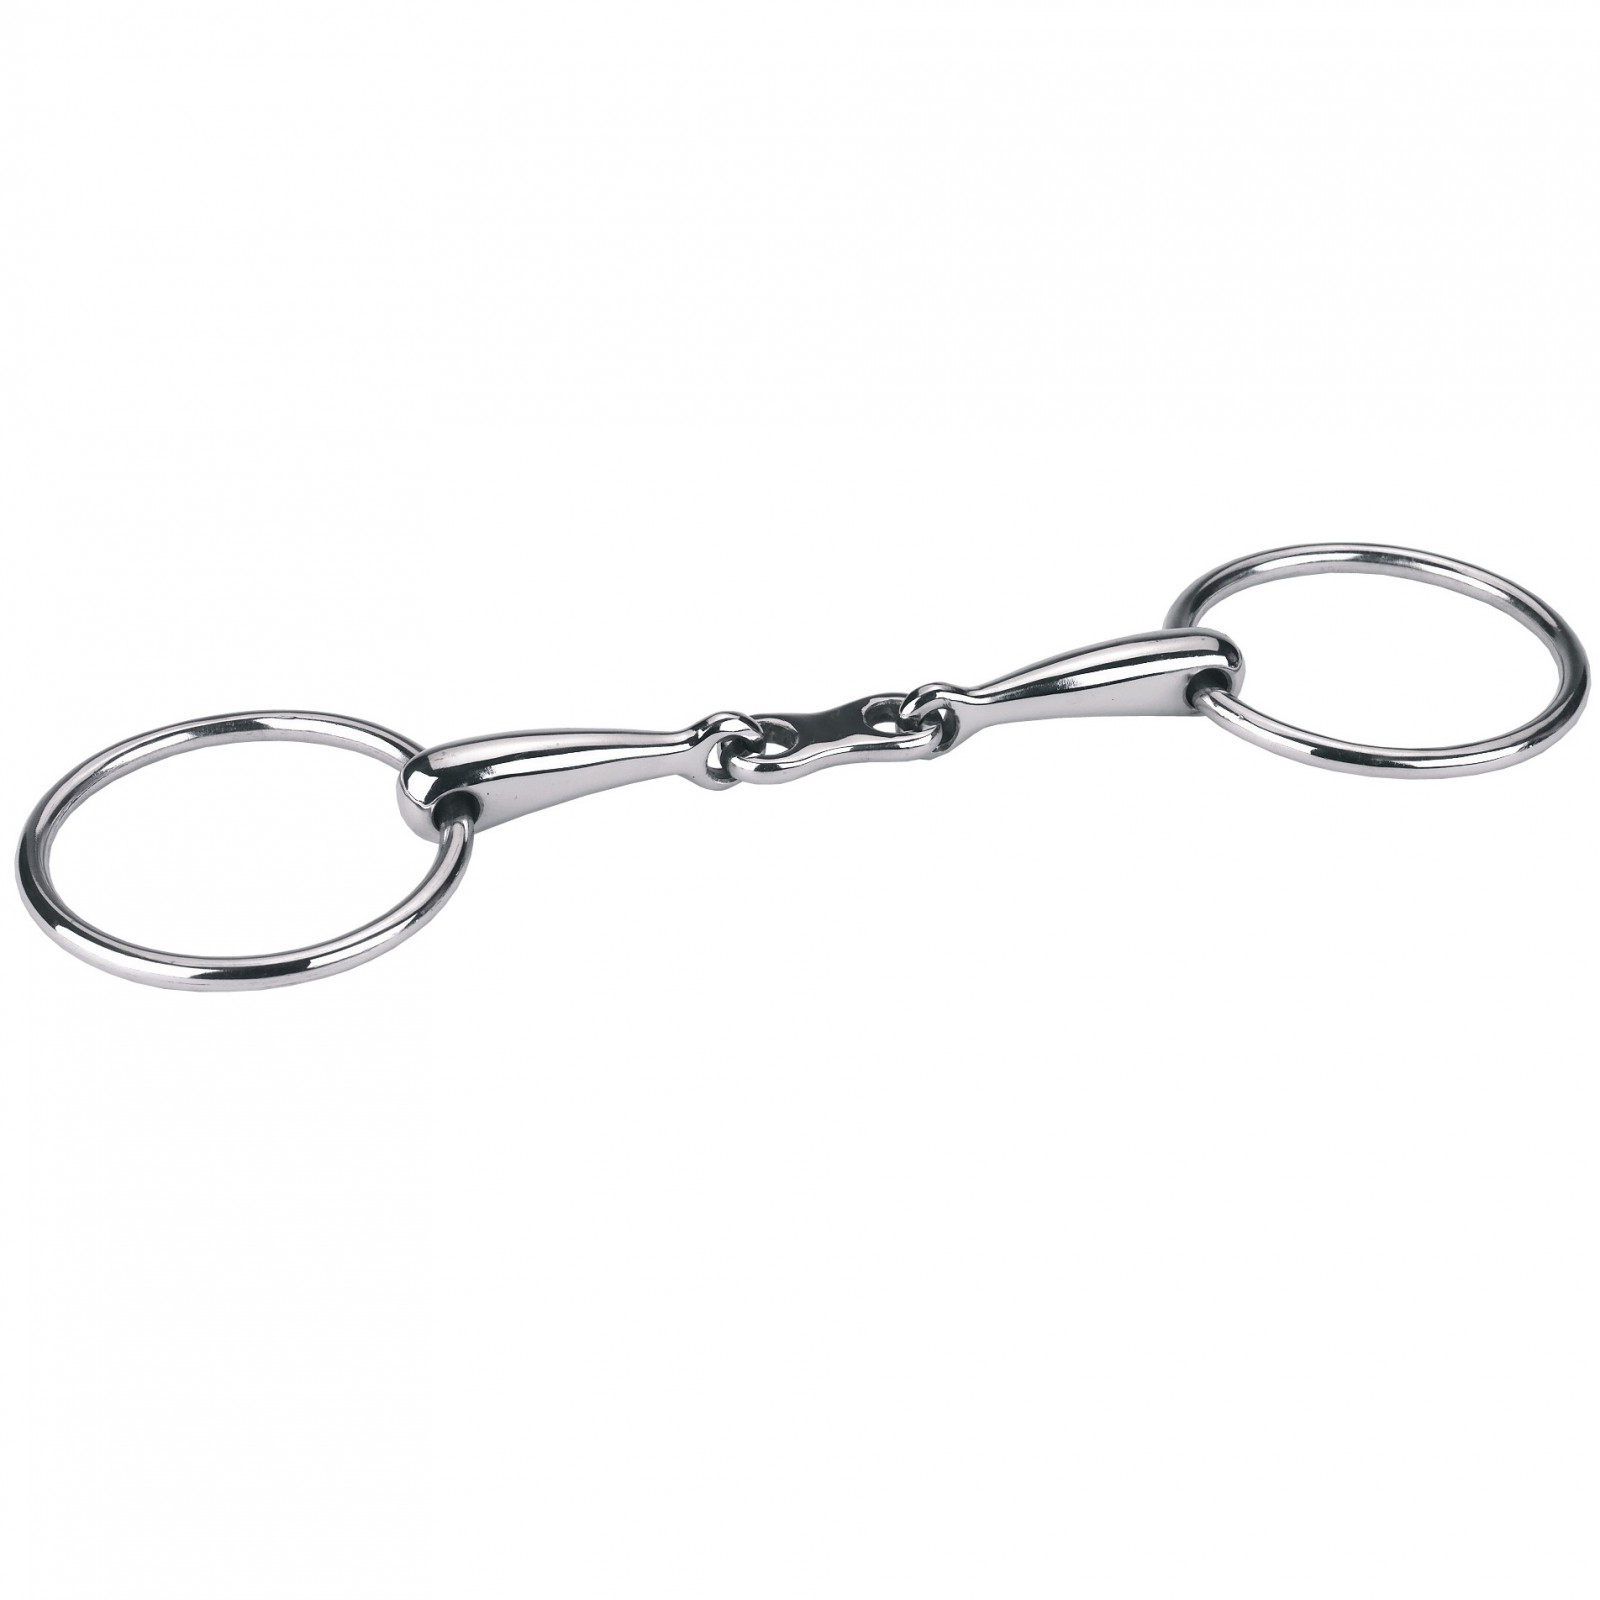 Snaffle loose ring bit - french link 14.5 cm